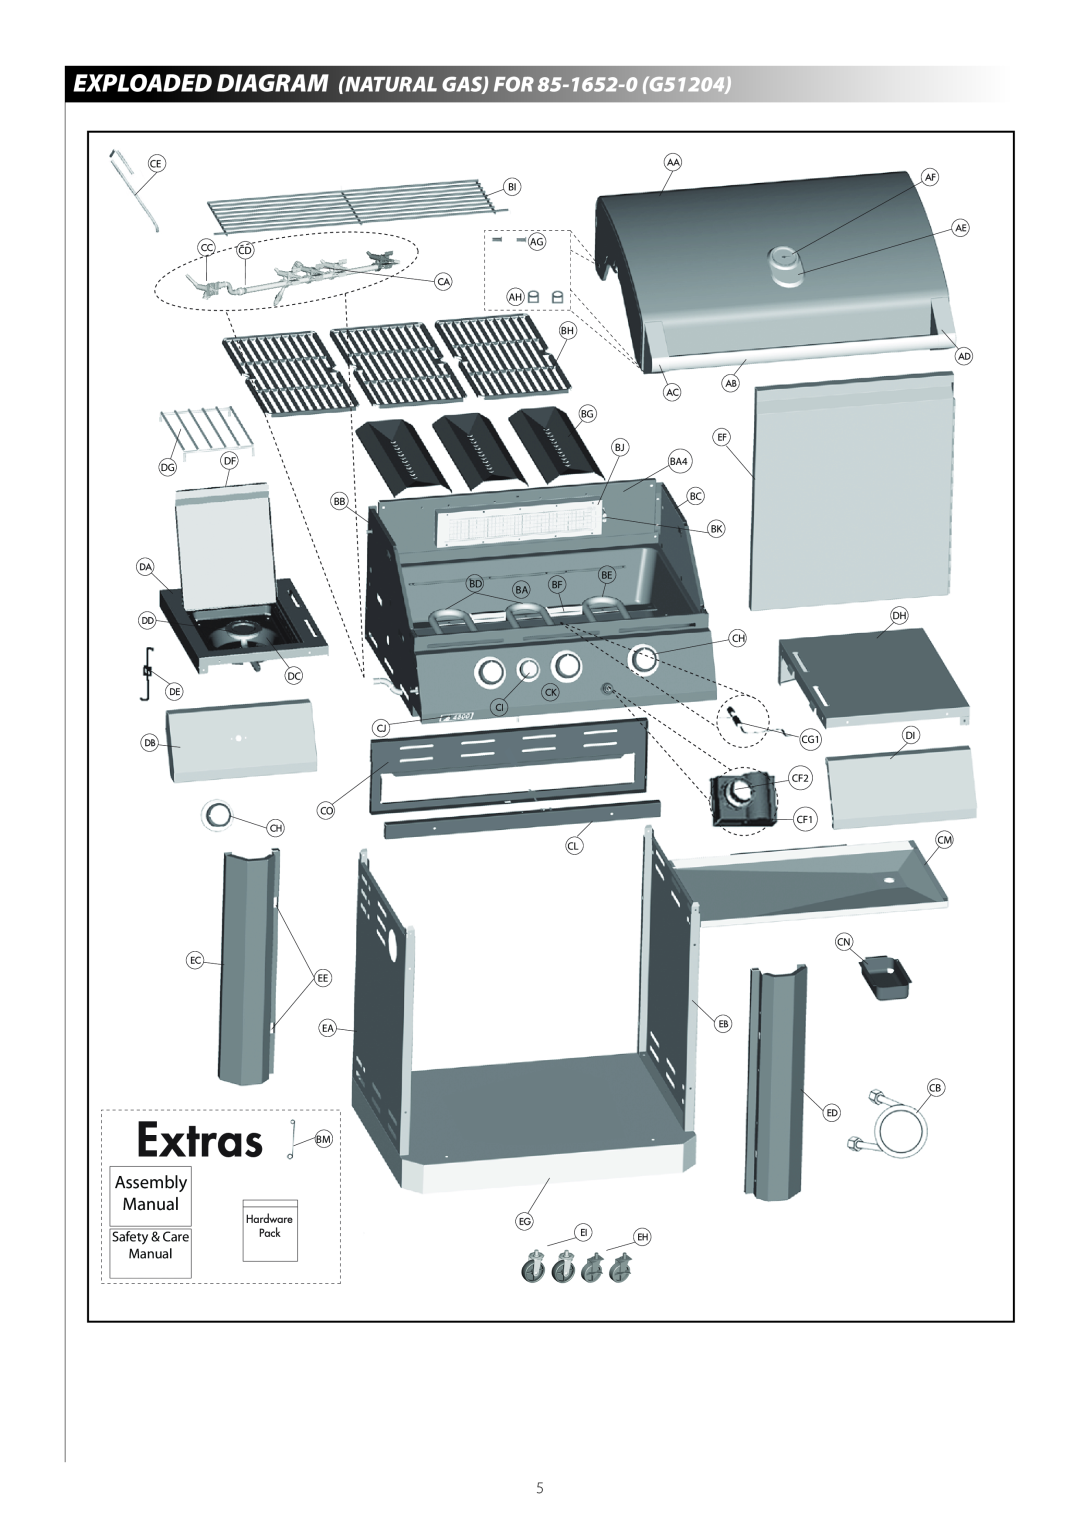 Centro G51202 warranty EXPLOADED DIAGRAM NATURAL GAS FOR 85-1652-0 G51204, Manual, Assembly 